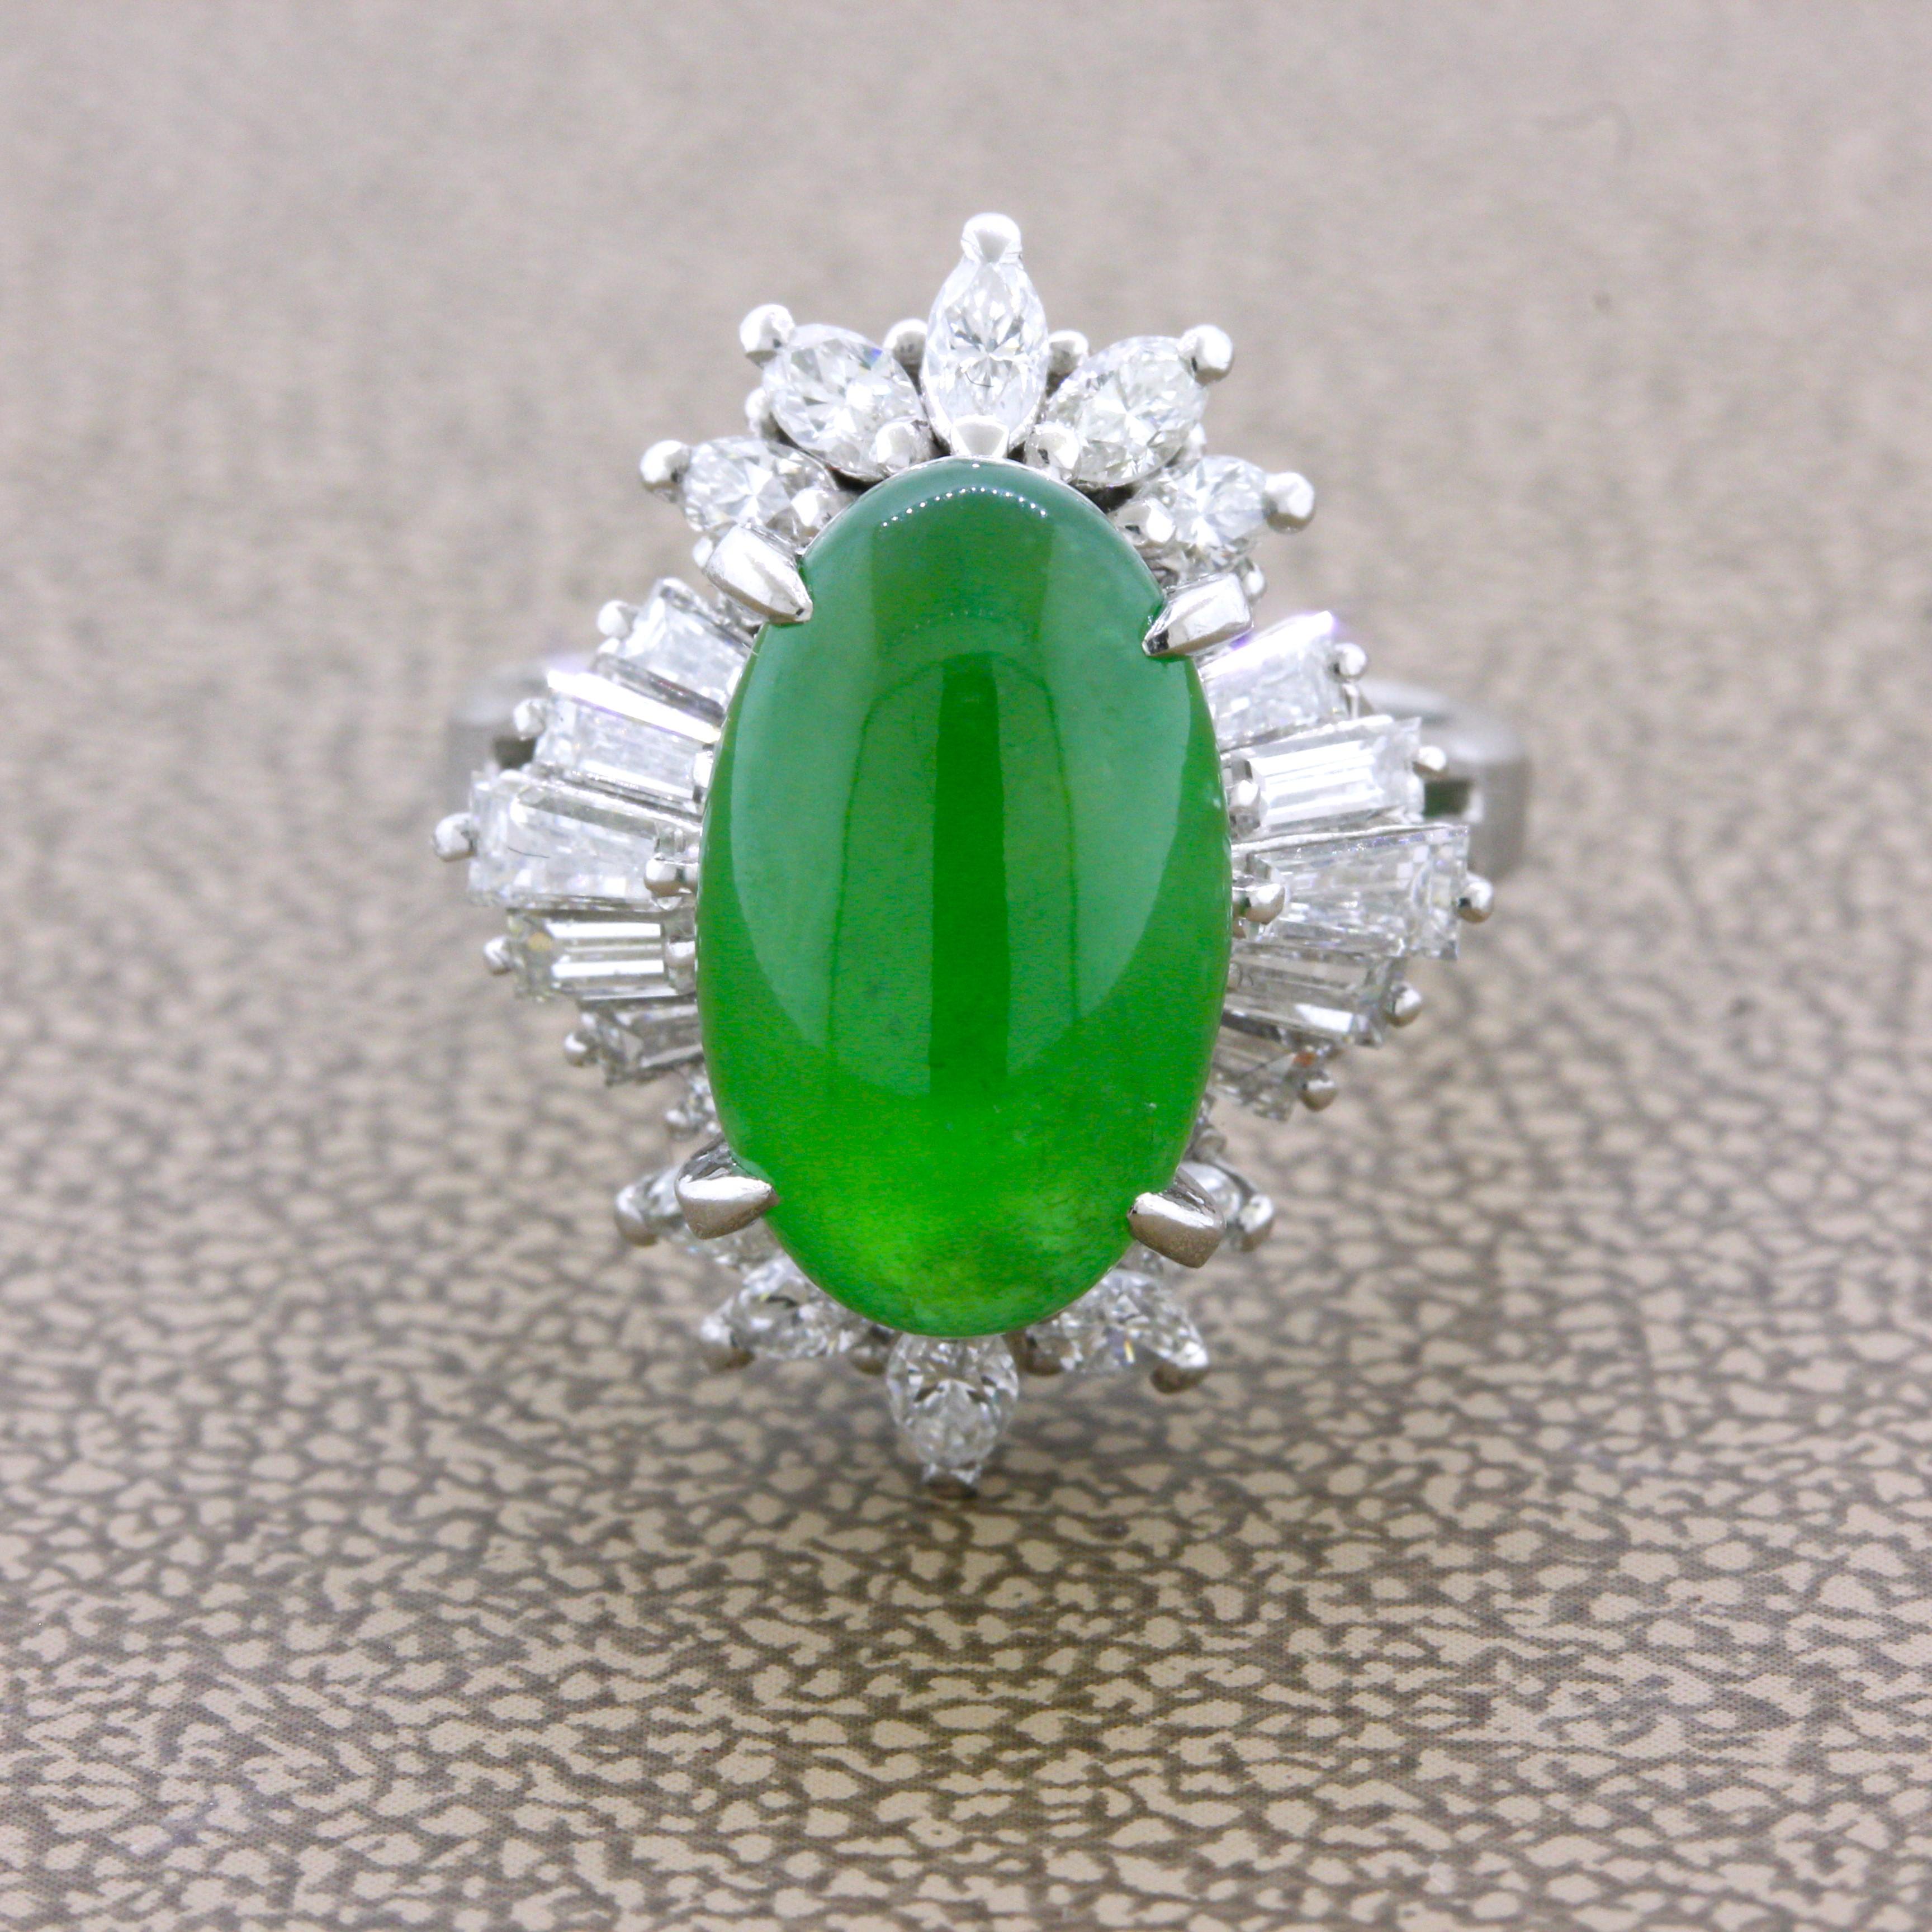 An impressive piece of fine gem quality jade takes center stage. It weighs 5.21 carats and is certified by the GIA natural “type A” jade with no treatment of any kind. This is especially impressive as the jade has a rich apple green color along with